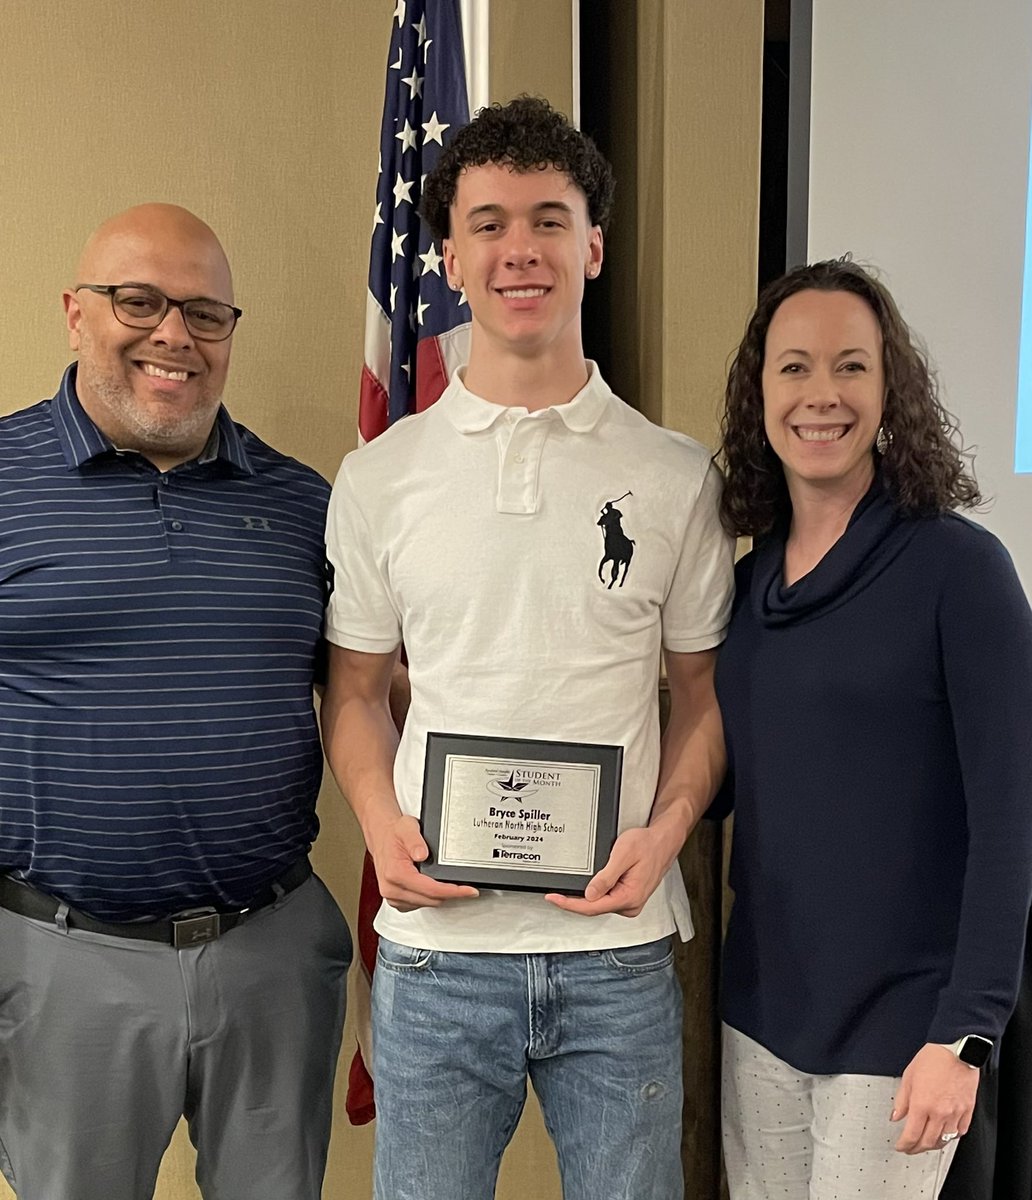 Congrats to senior @BryceSpiller for being selected as the Chamber of Commerce Student of the Month! Bryce has committed to the United States Air Force Academy in CO where he will major in Management, play D1 basketball, & pursue a career as a pilot. Way to go Bryce! #TNT 📚✈️🏀